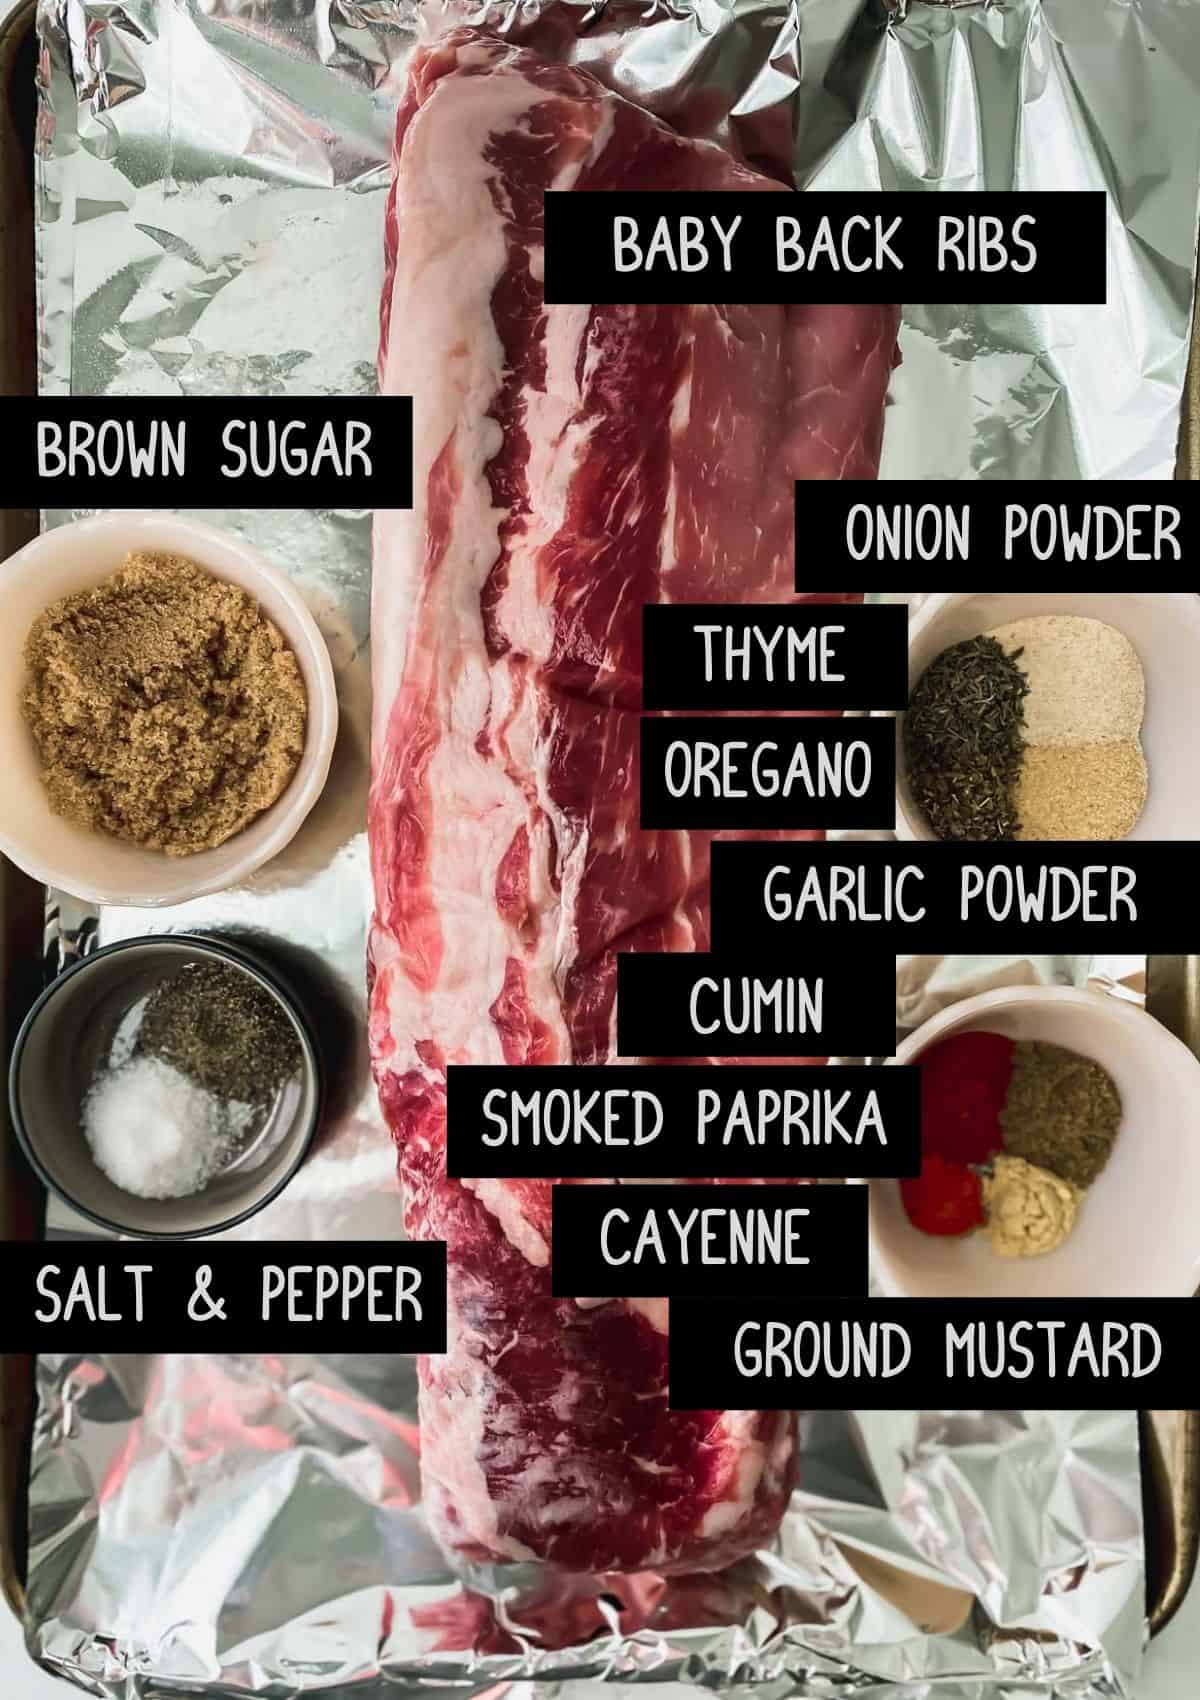 raw slab of ribs with ingredients